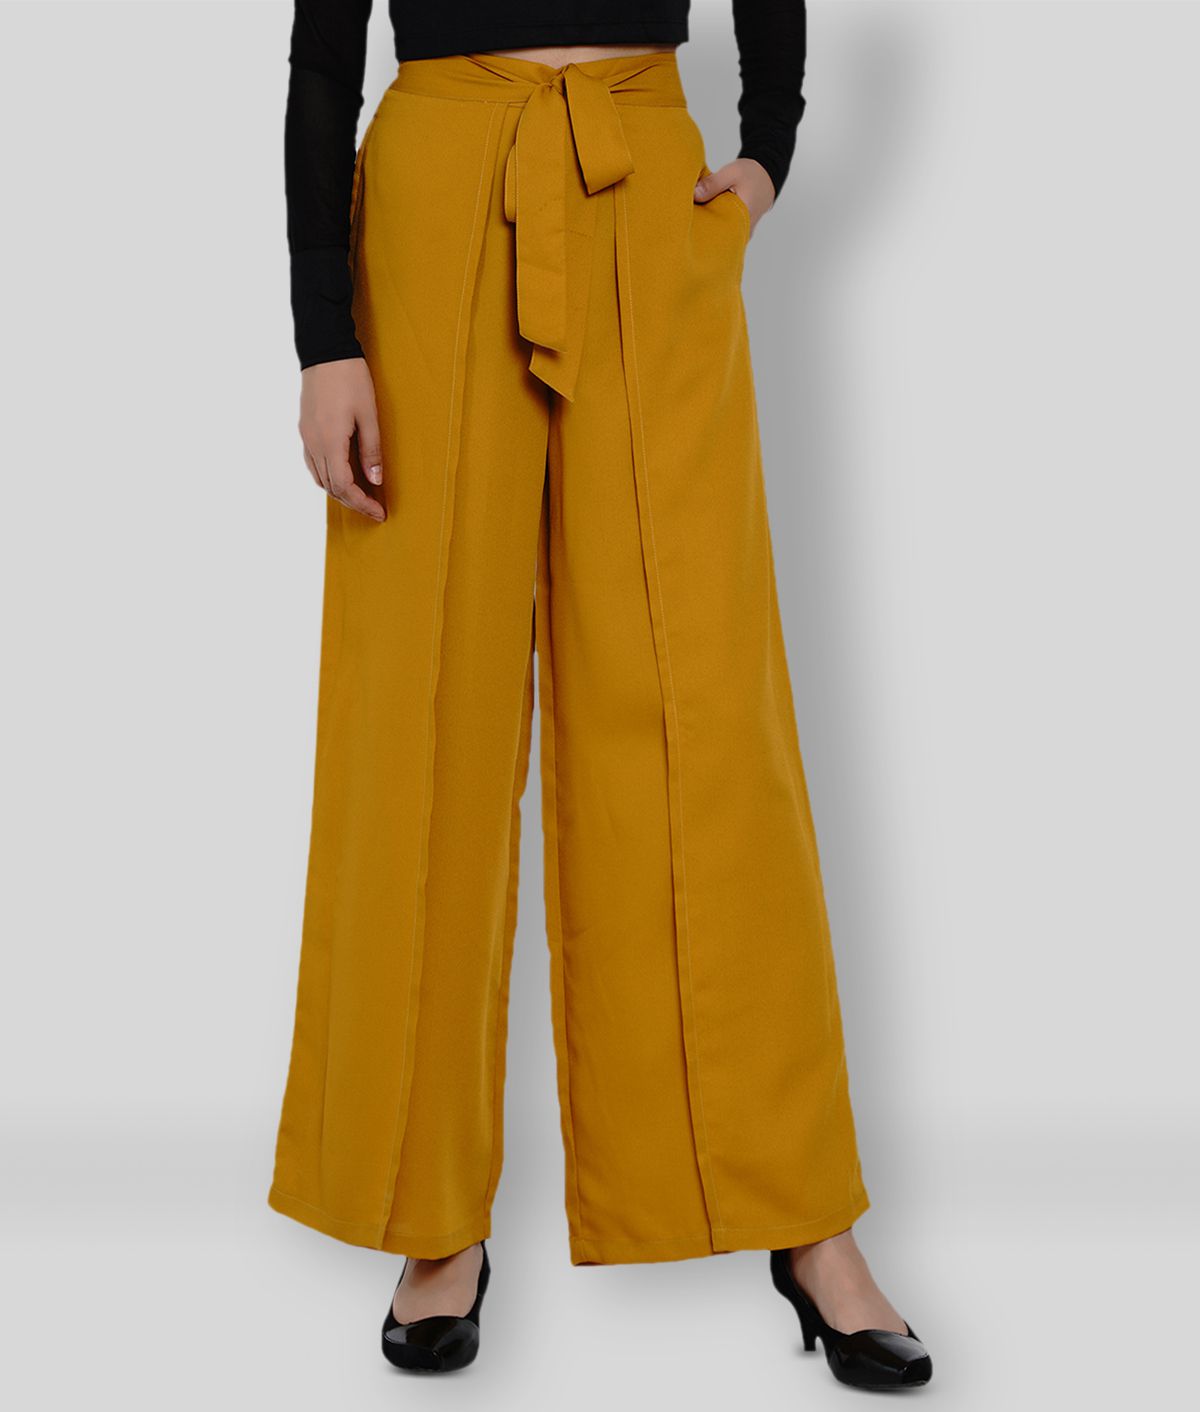 Texco - Yellow Polyester Flared Women's Palazzos ( Pack of 1 )